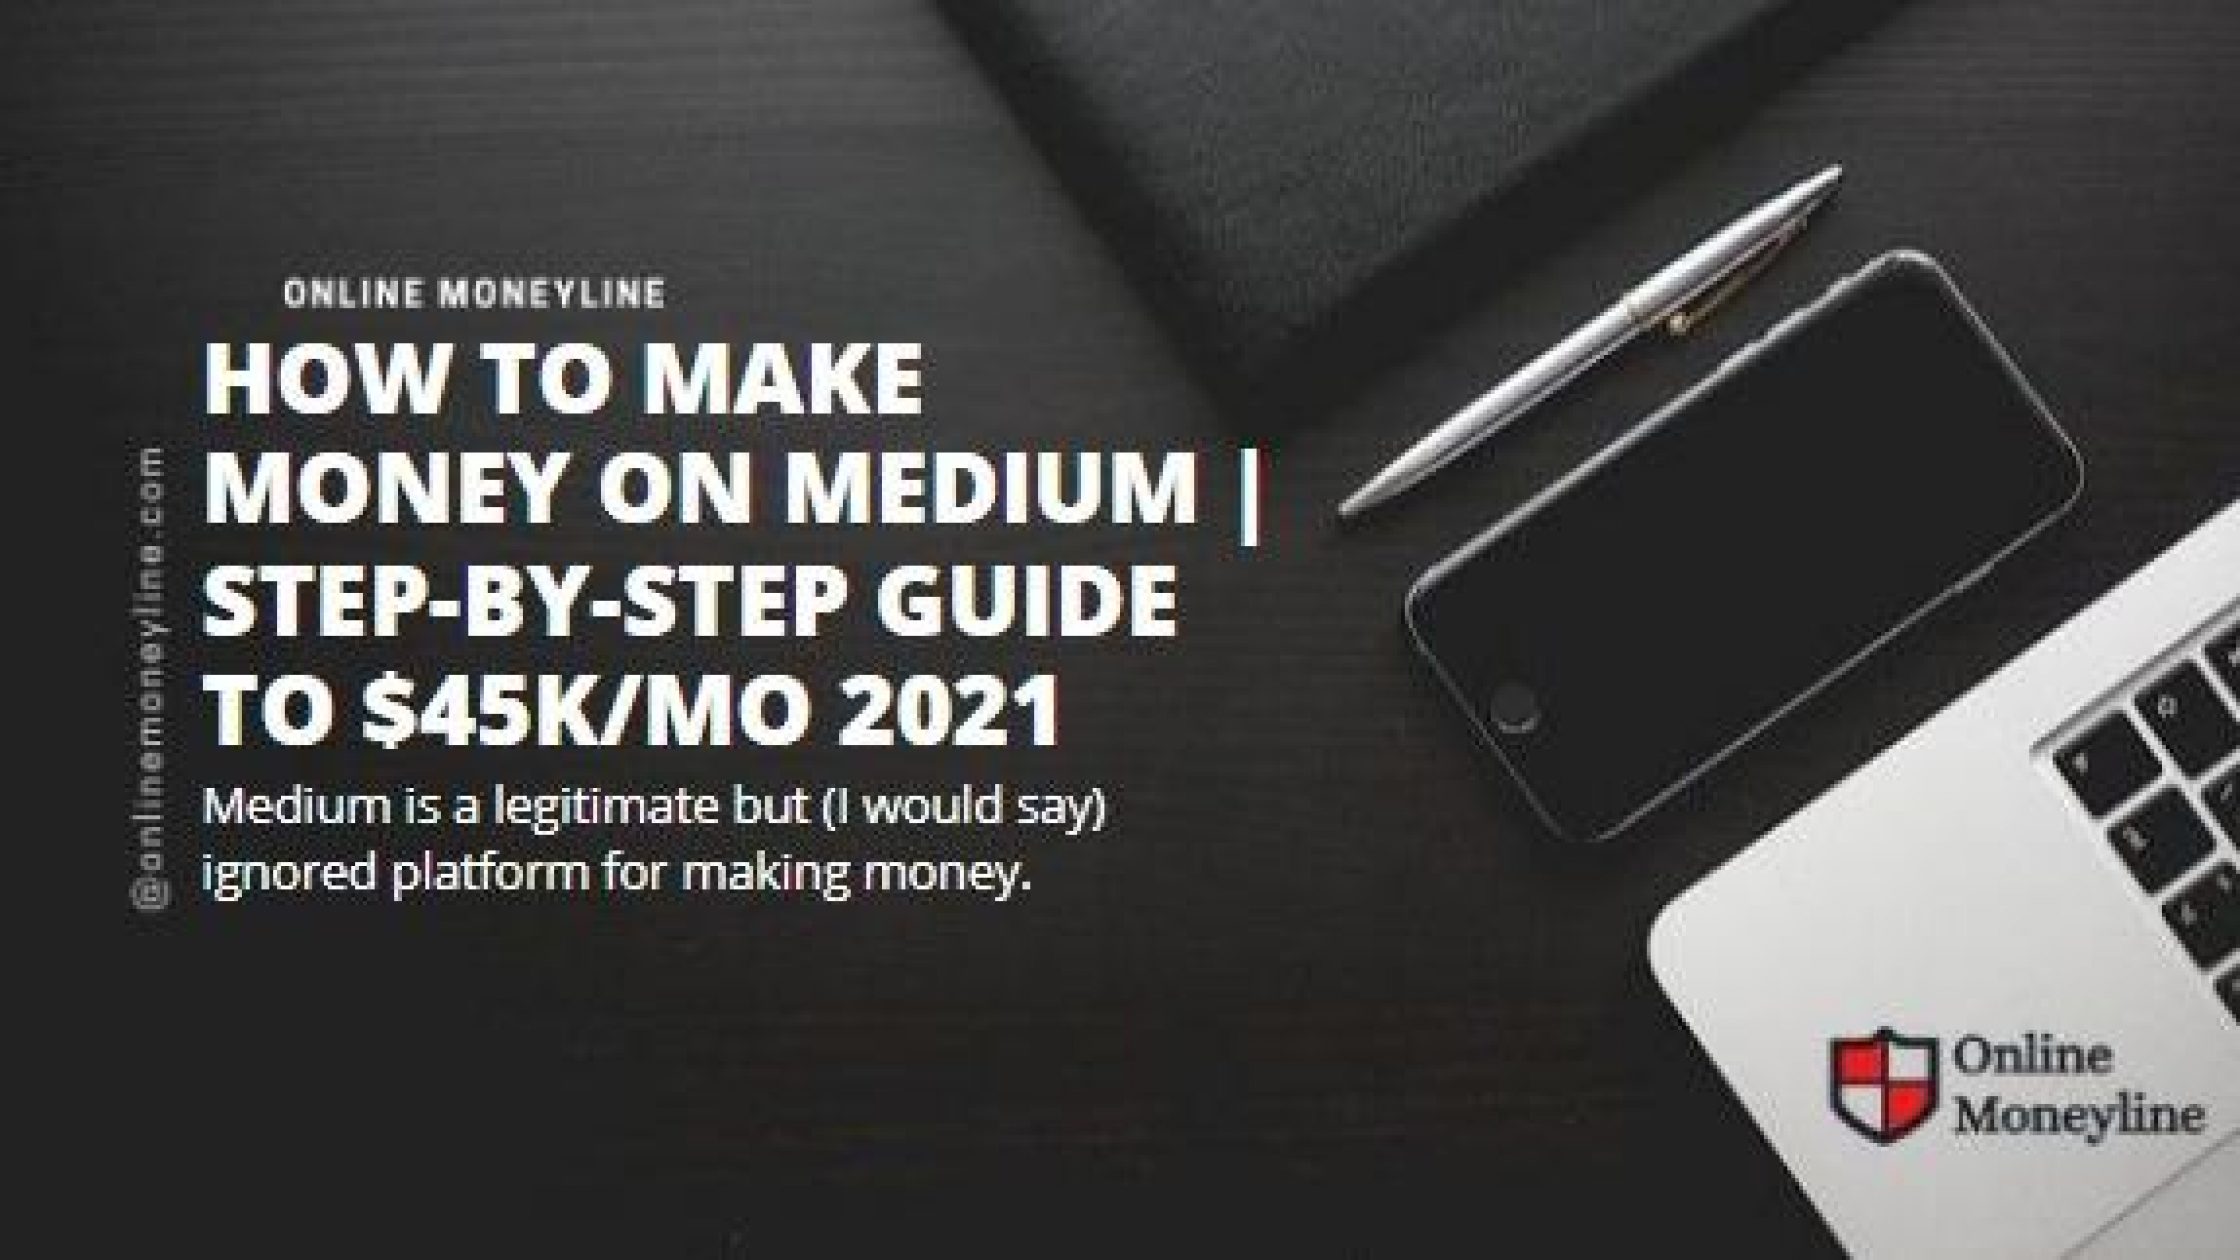 How to Make Money on Medium | Step-by-Step Guide to $45k/Mo 2021